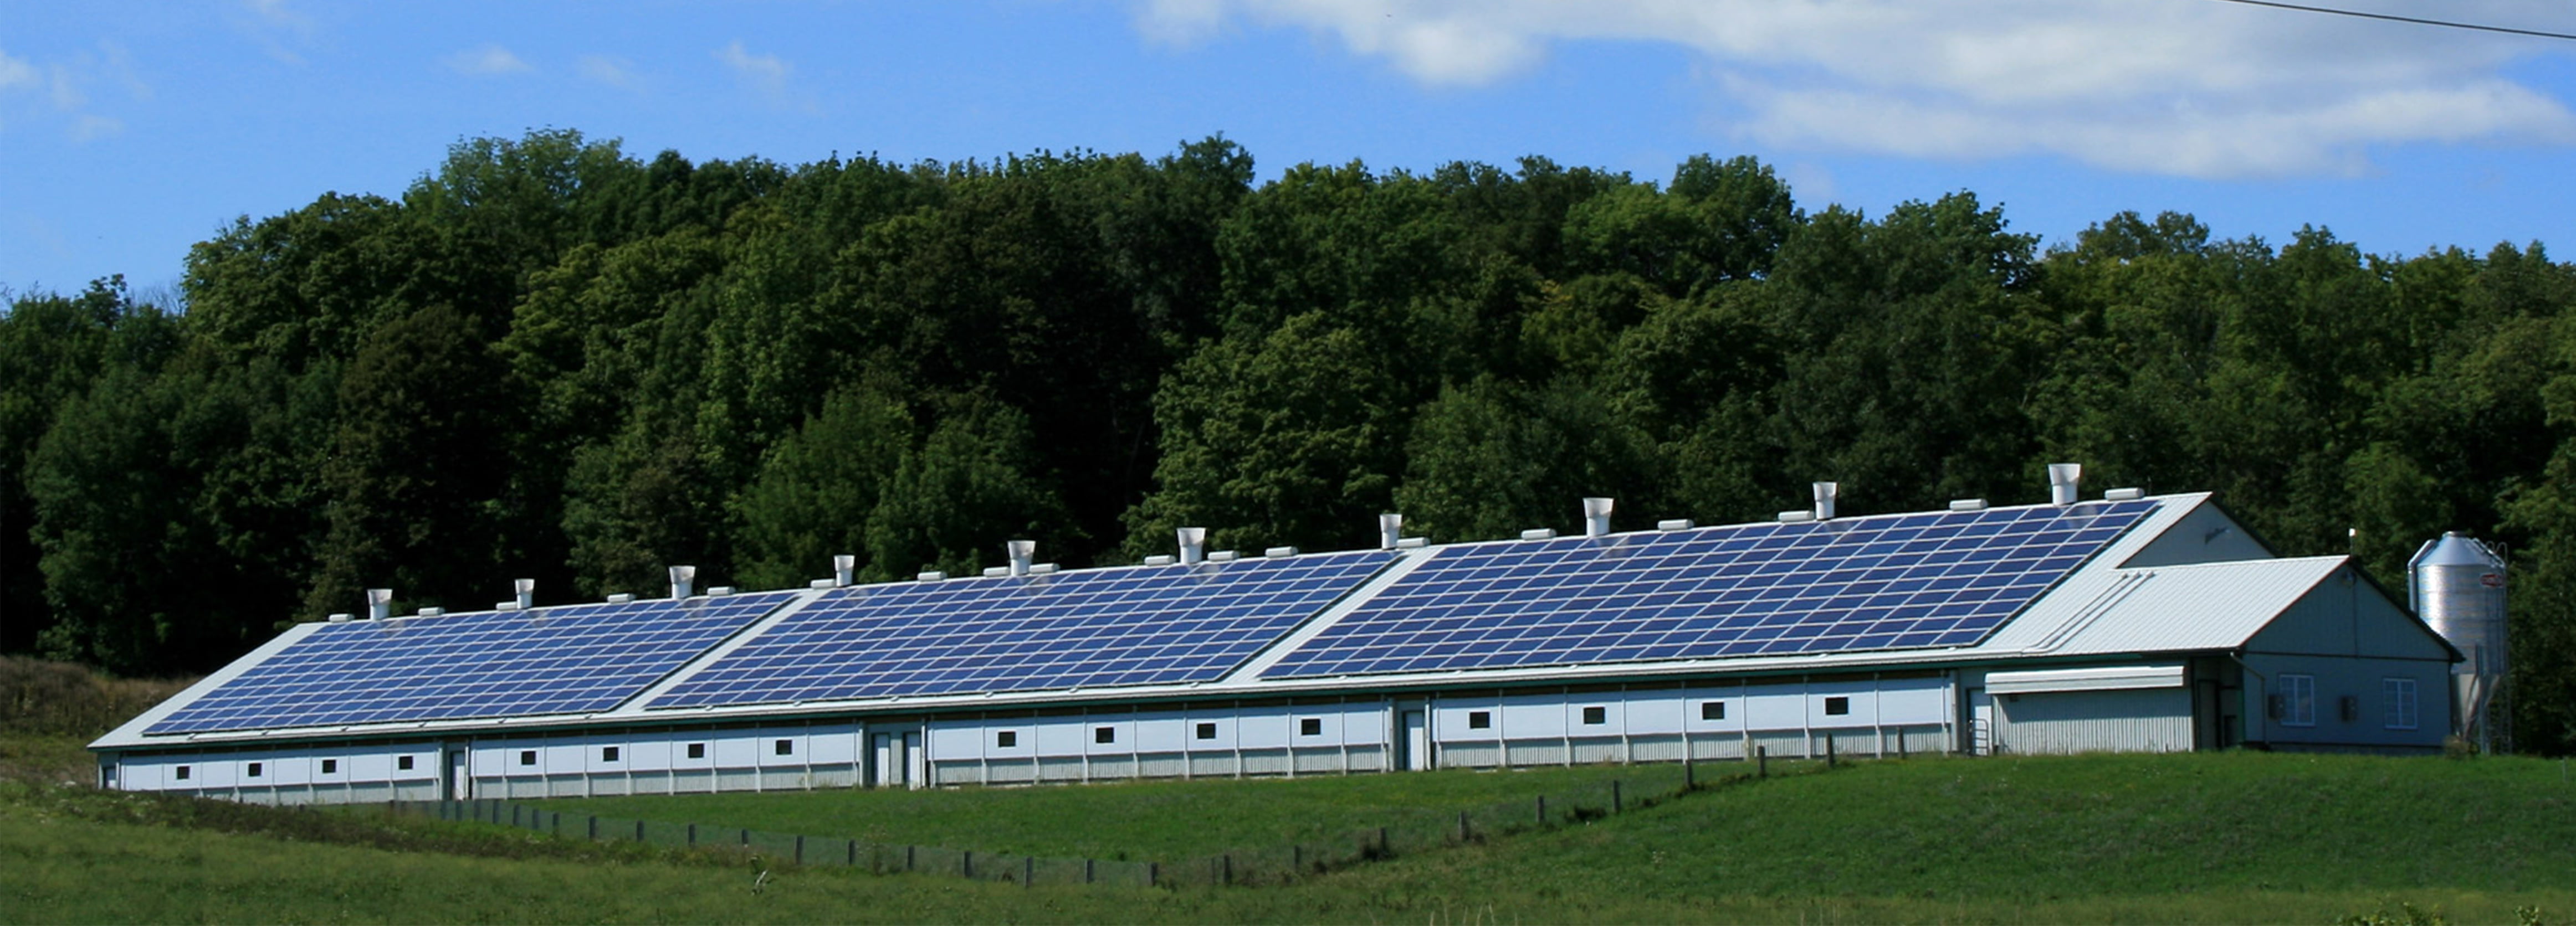 All things photovoltaic